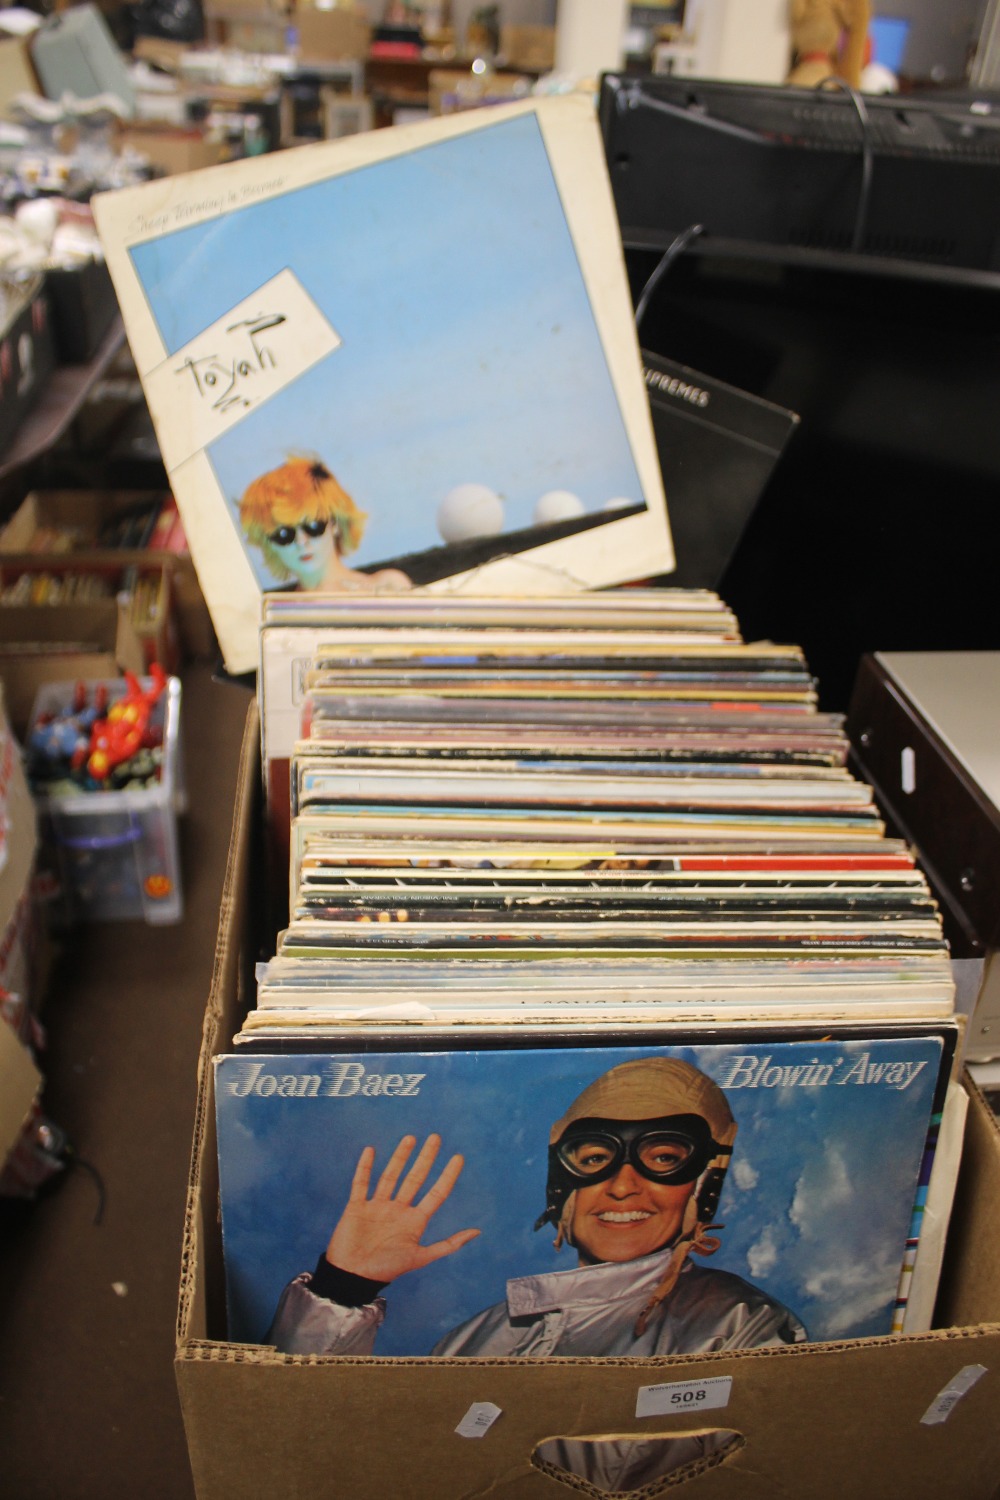 CIRCA 80 LP RECORDS TO INCLUDE DIANA ROSS, CARPENTERS, BONNY TYLER, ROD STEWART, BUDDY HOLLY, LIONEL